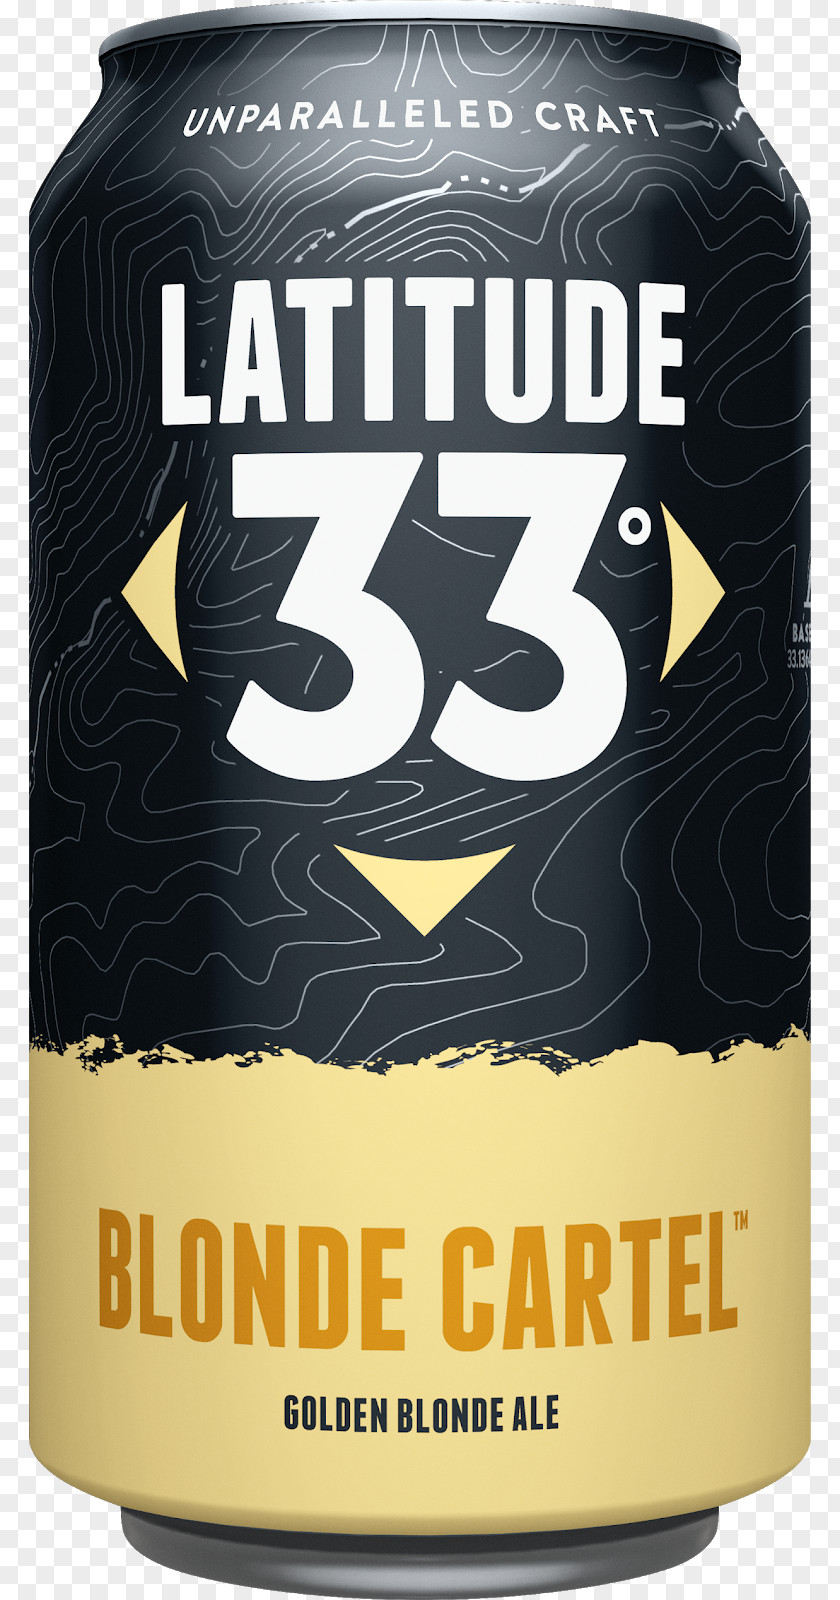 Enough Refreshing Latitude 33 Brewing Company India Pale Ale Alcoholic Drink Brand Brewery PNG